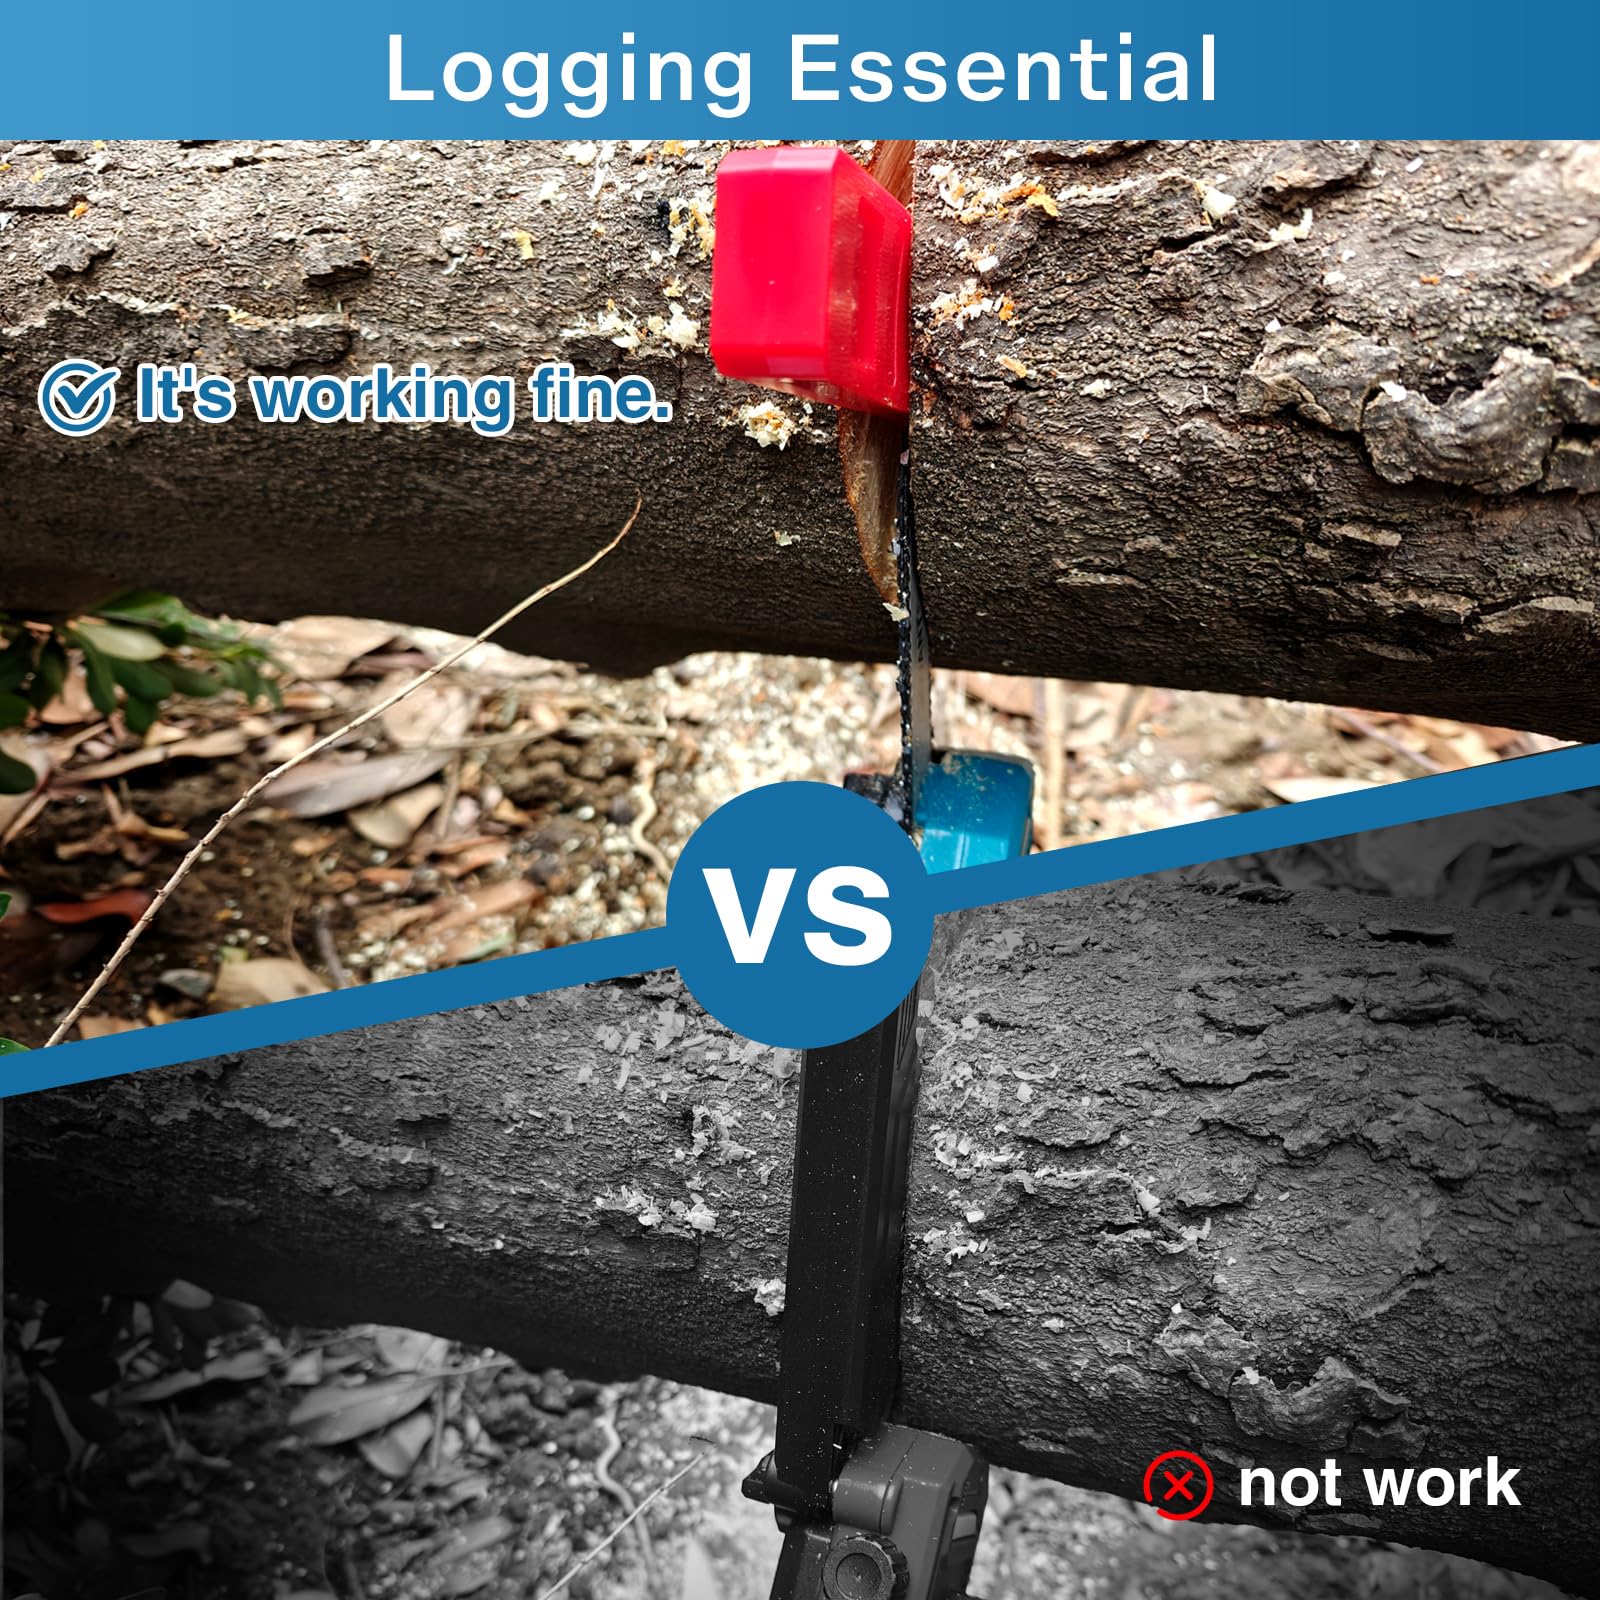 Logging Essential accessory lt's working perfectly